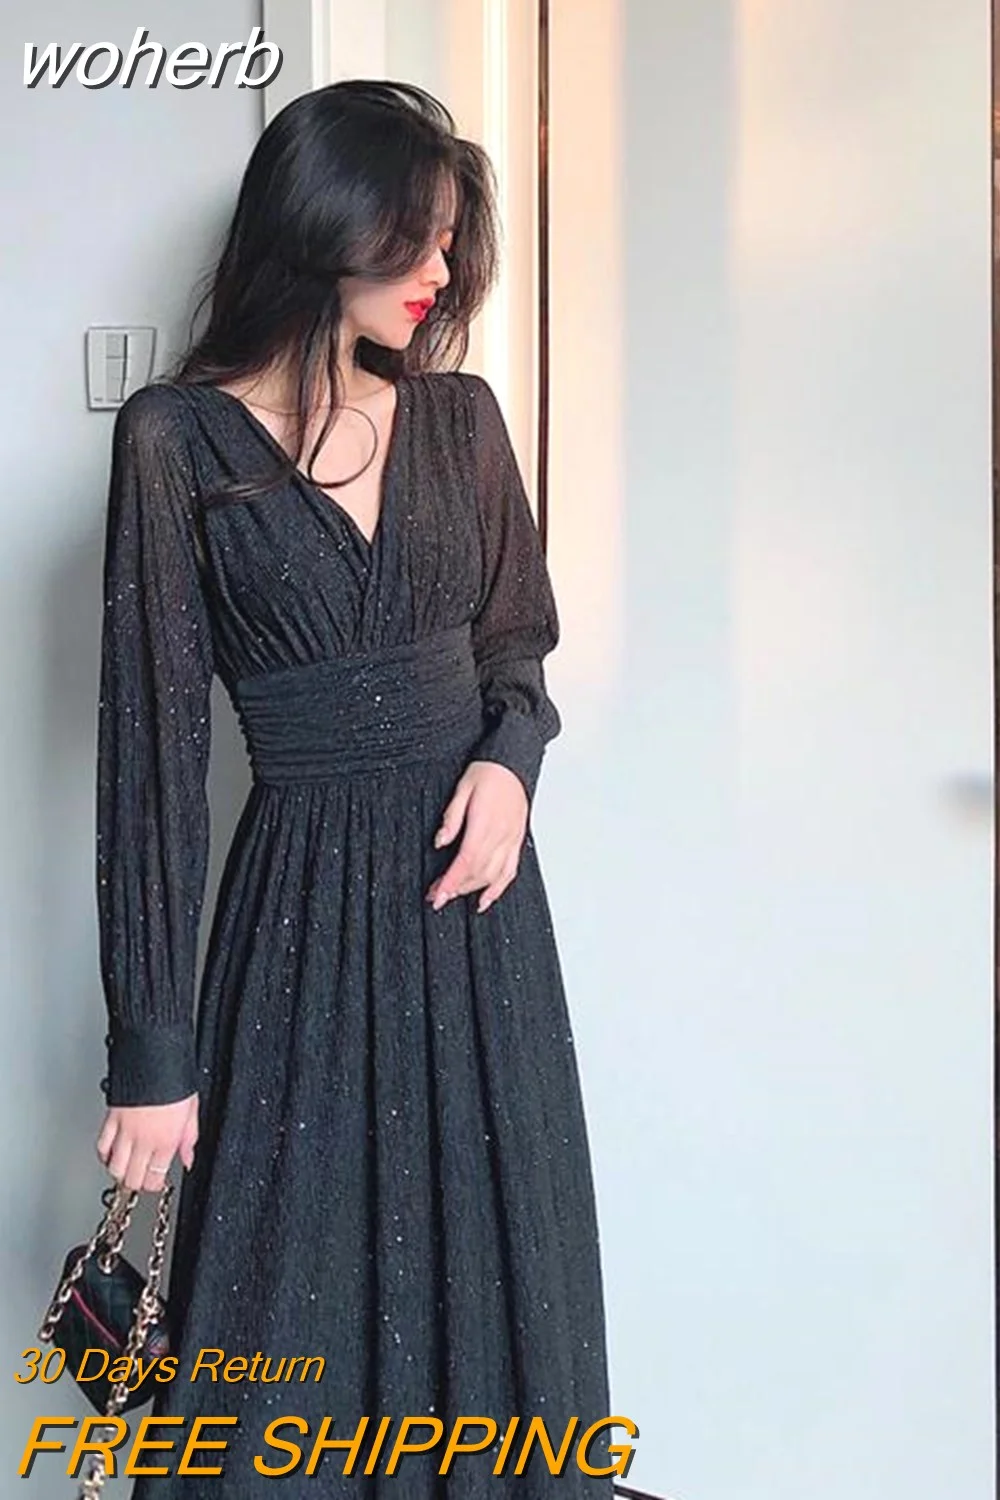 woherb Sleeve Dress Women Autumn Ankle-length Female Elegant Solid Bright-silk Stylish Vintage French Style Party Ulzzang Trendy